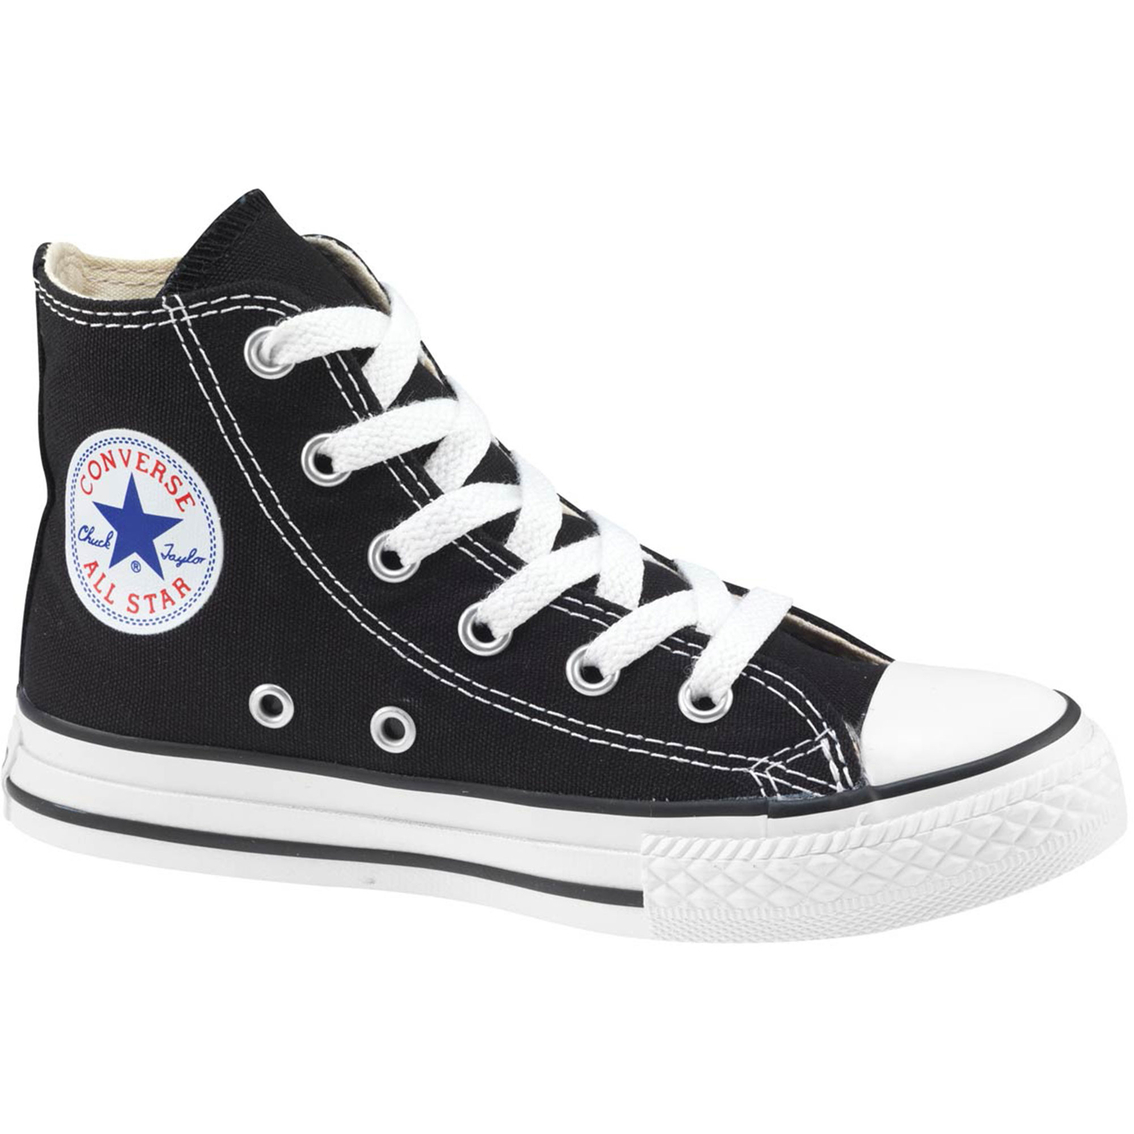 Converse Kids Chuck Taylor All Star Hi Top Sneakers | Sneakers ...